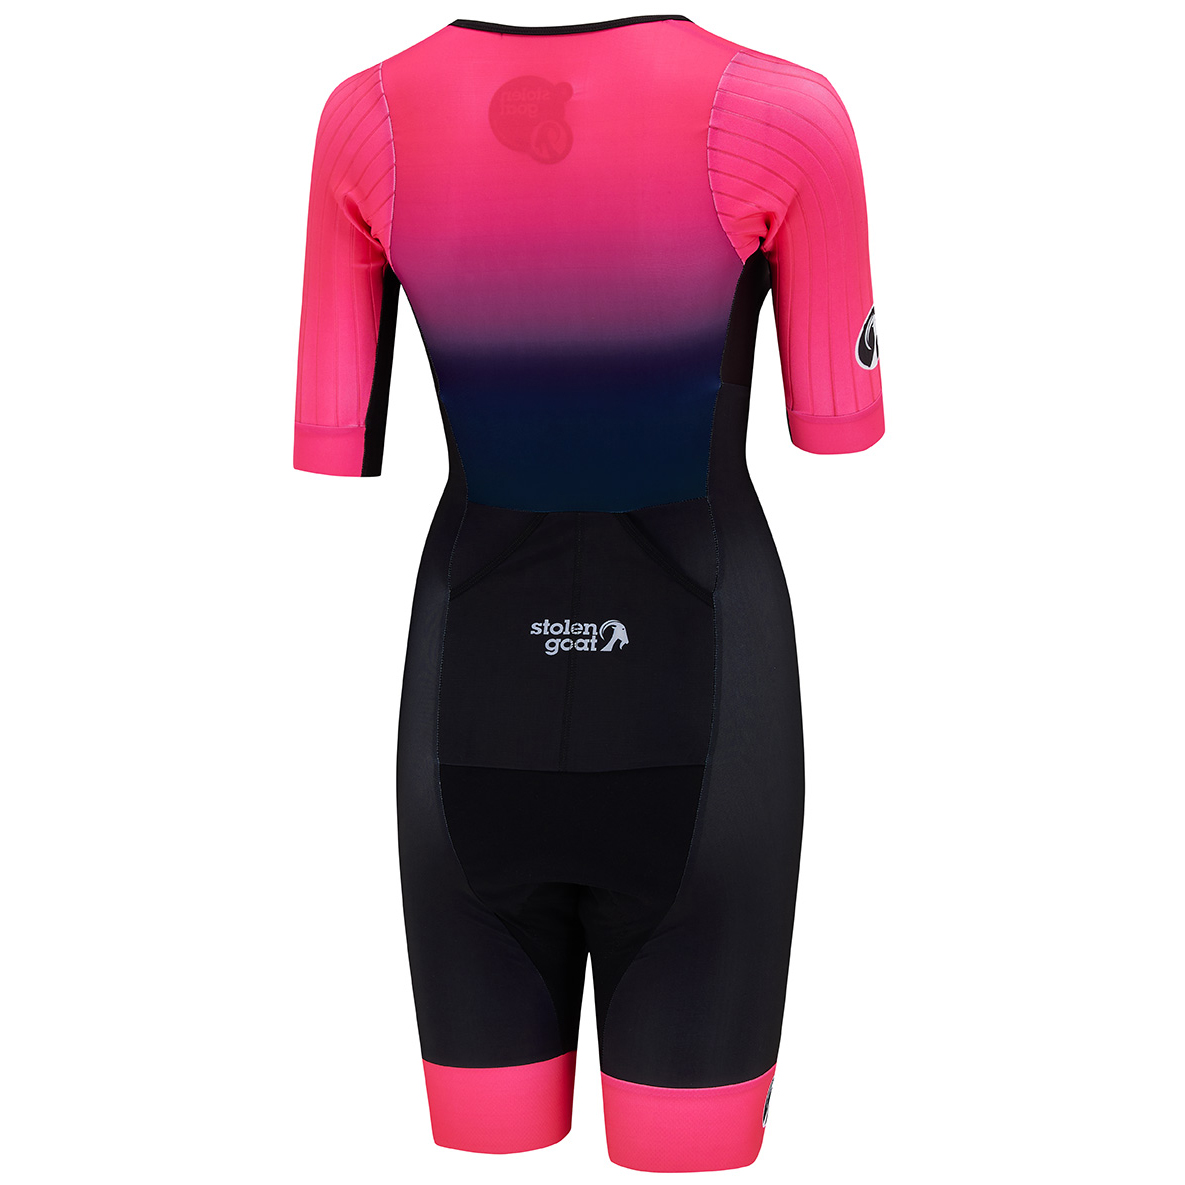 Rear view of Stolen Goat women's Dodge short sleeved triathlon race suit bright pink to black gradient fade with bright pink leg grippers